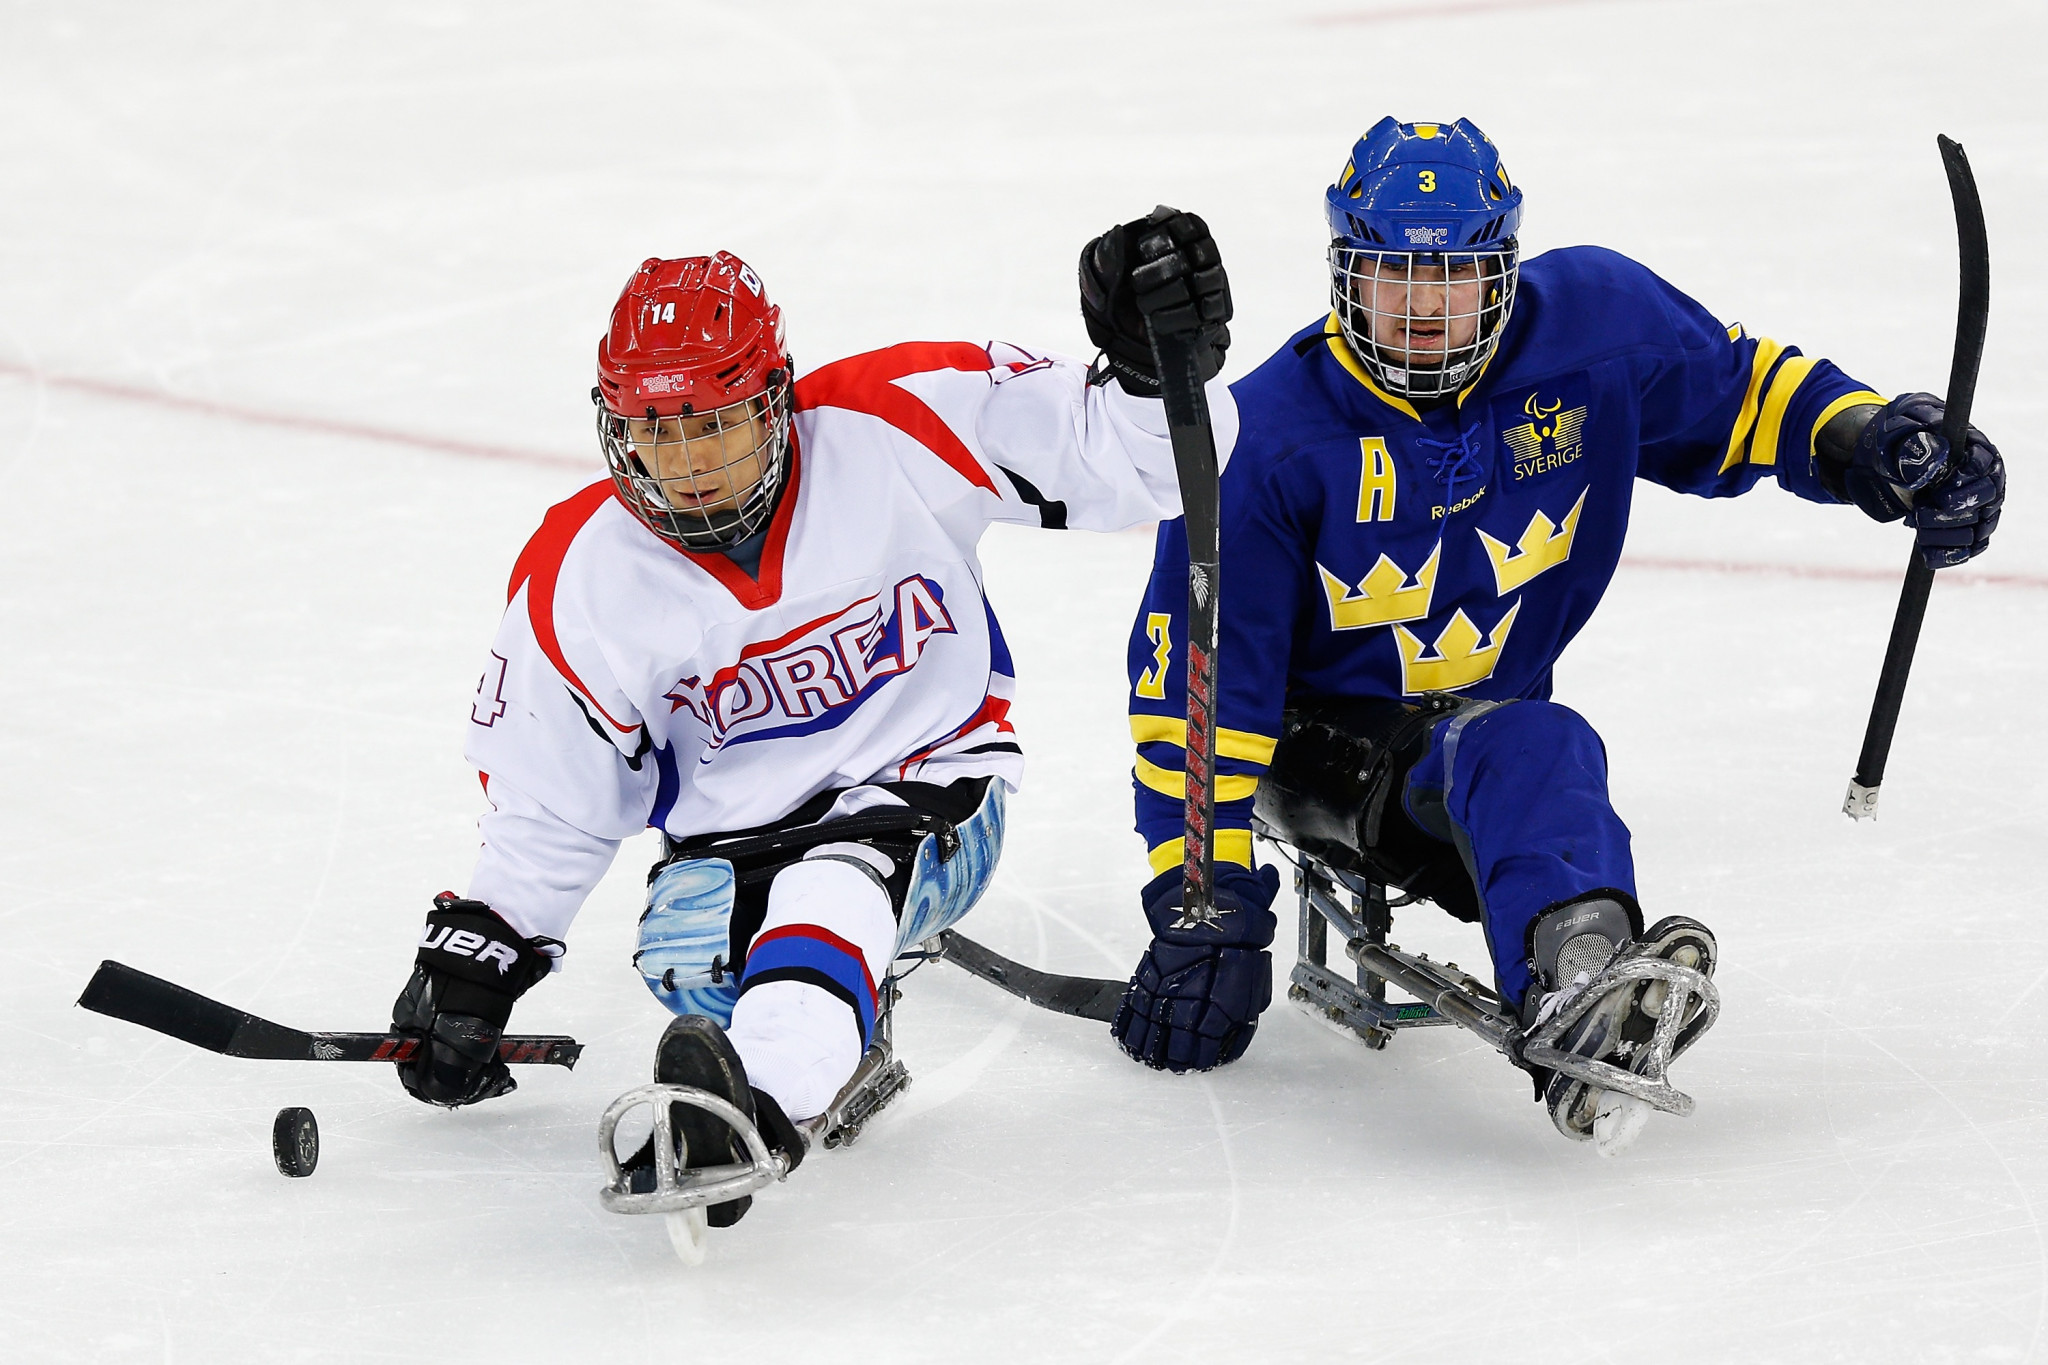 South Korean ice hockey player Seung-Hwan Jung completes the line-up ©Getty Images